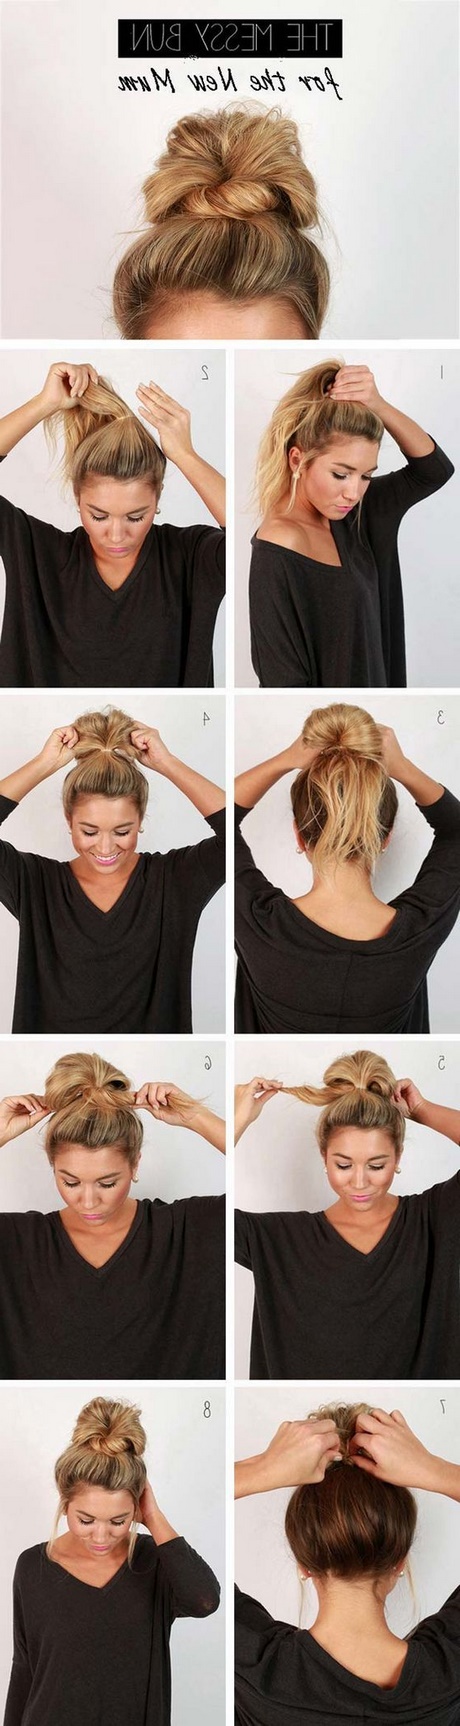 easy-things-to-do-with-long-hair-05_17 Easy things to do with long hair